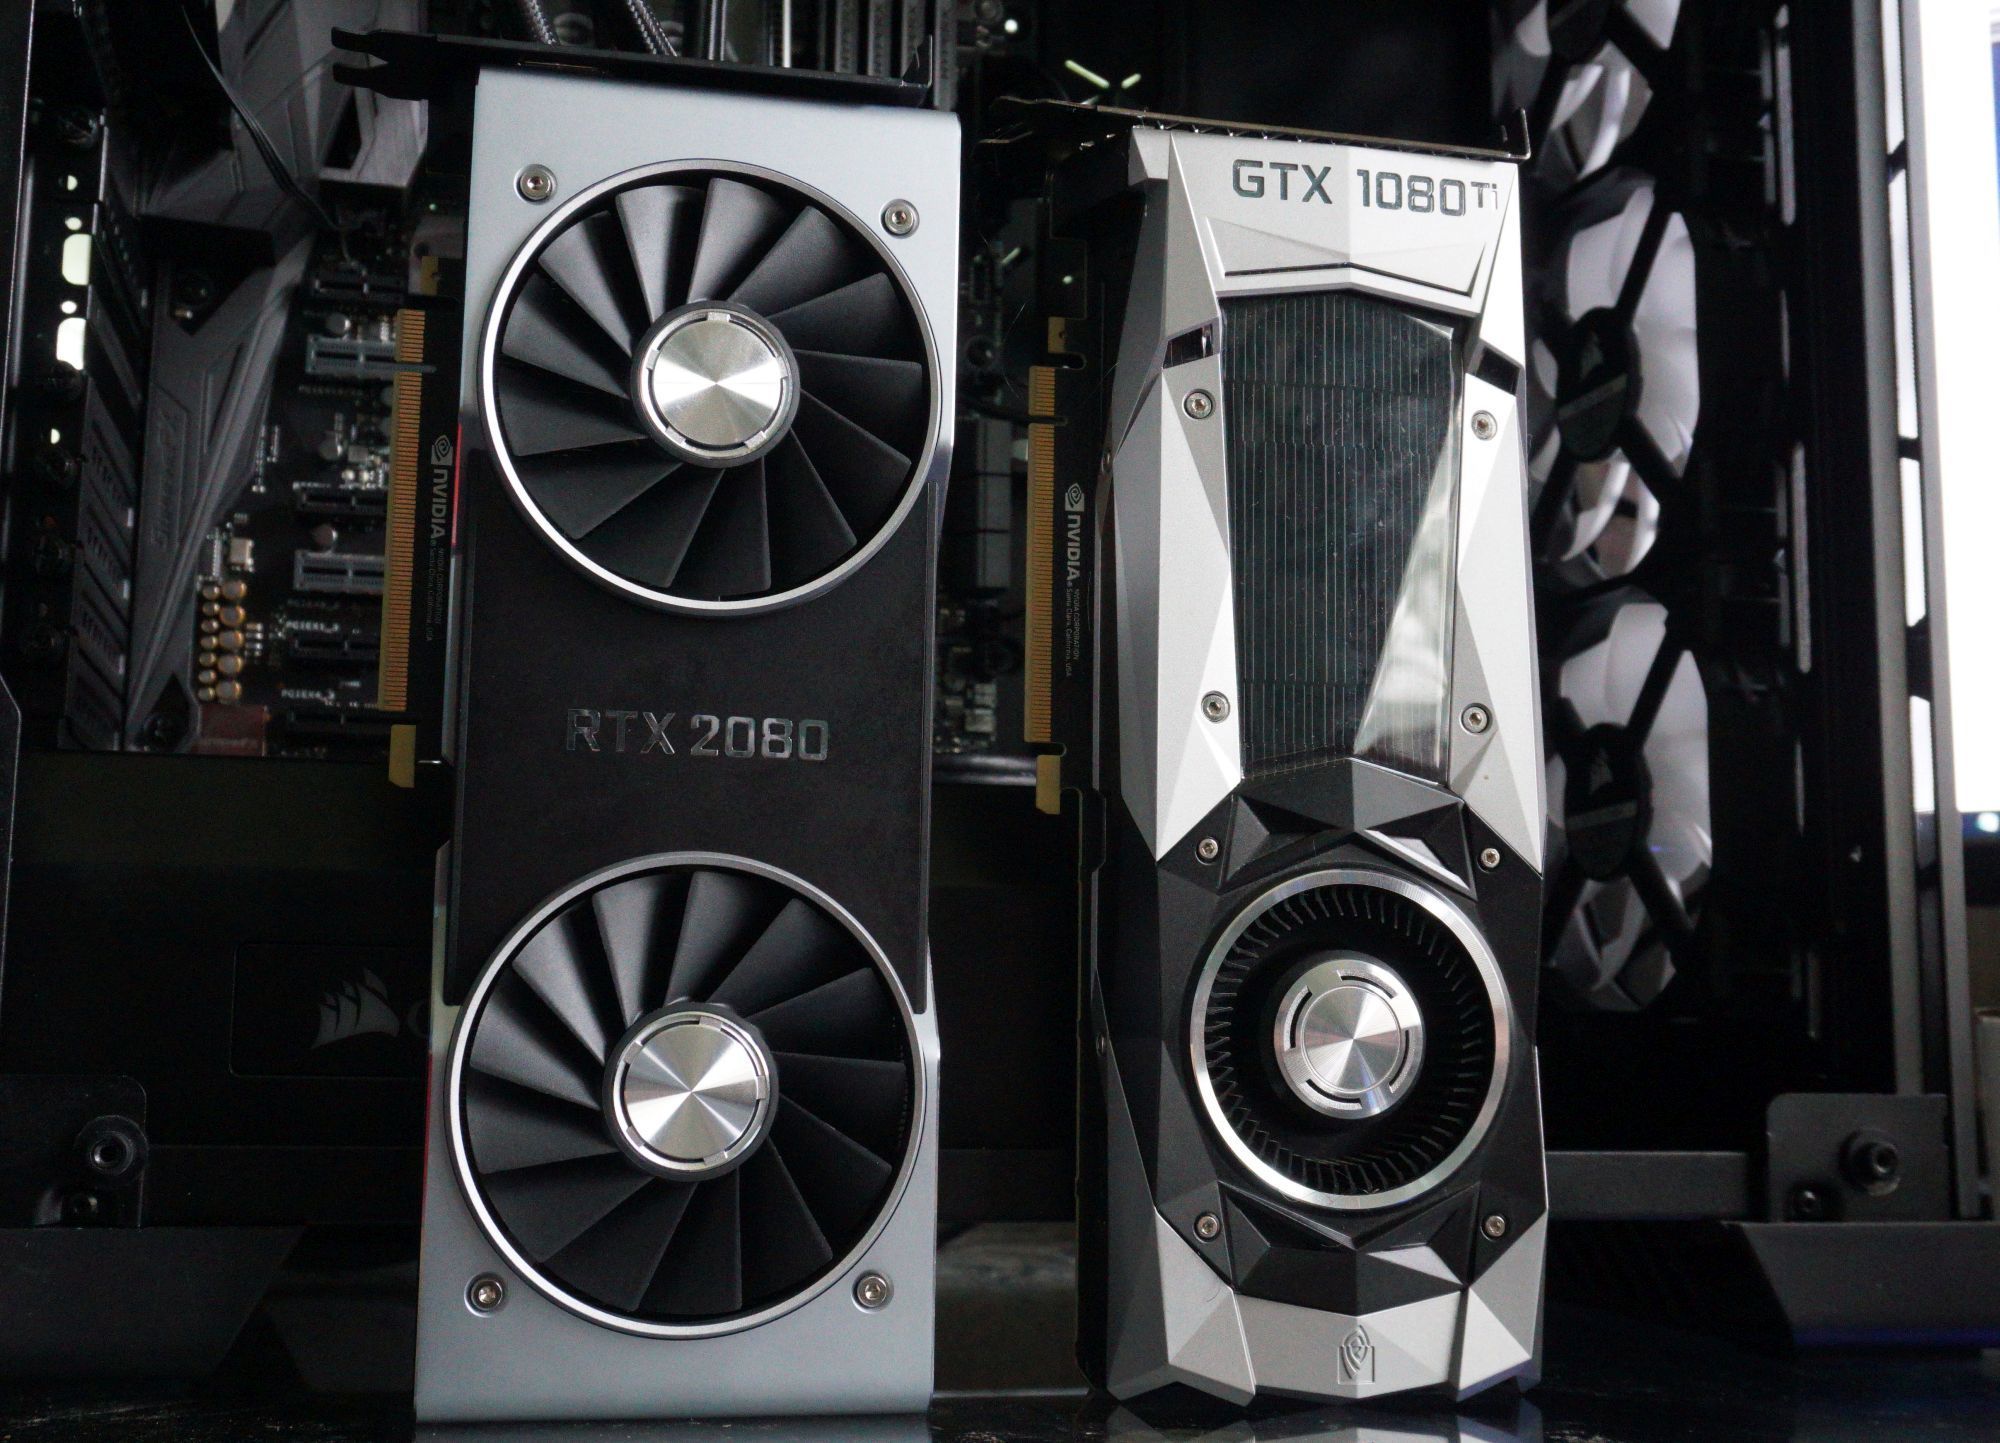 Nvidia GeForce RTX 2080 vs GTX 1080 Ti: Which graphics card should you